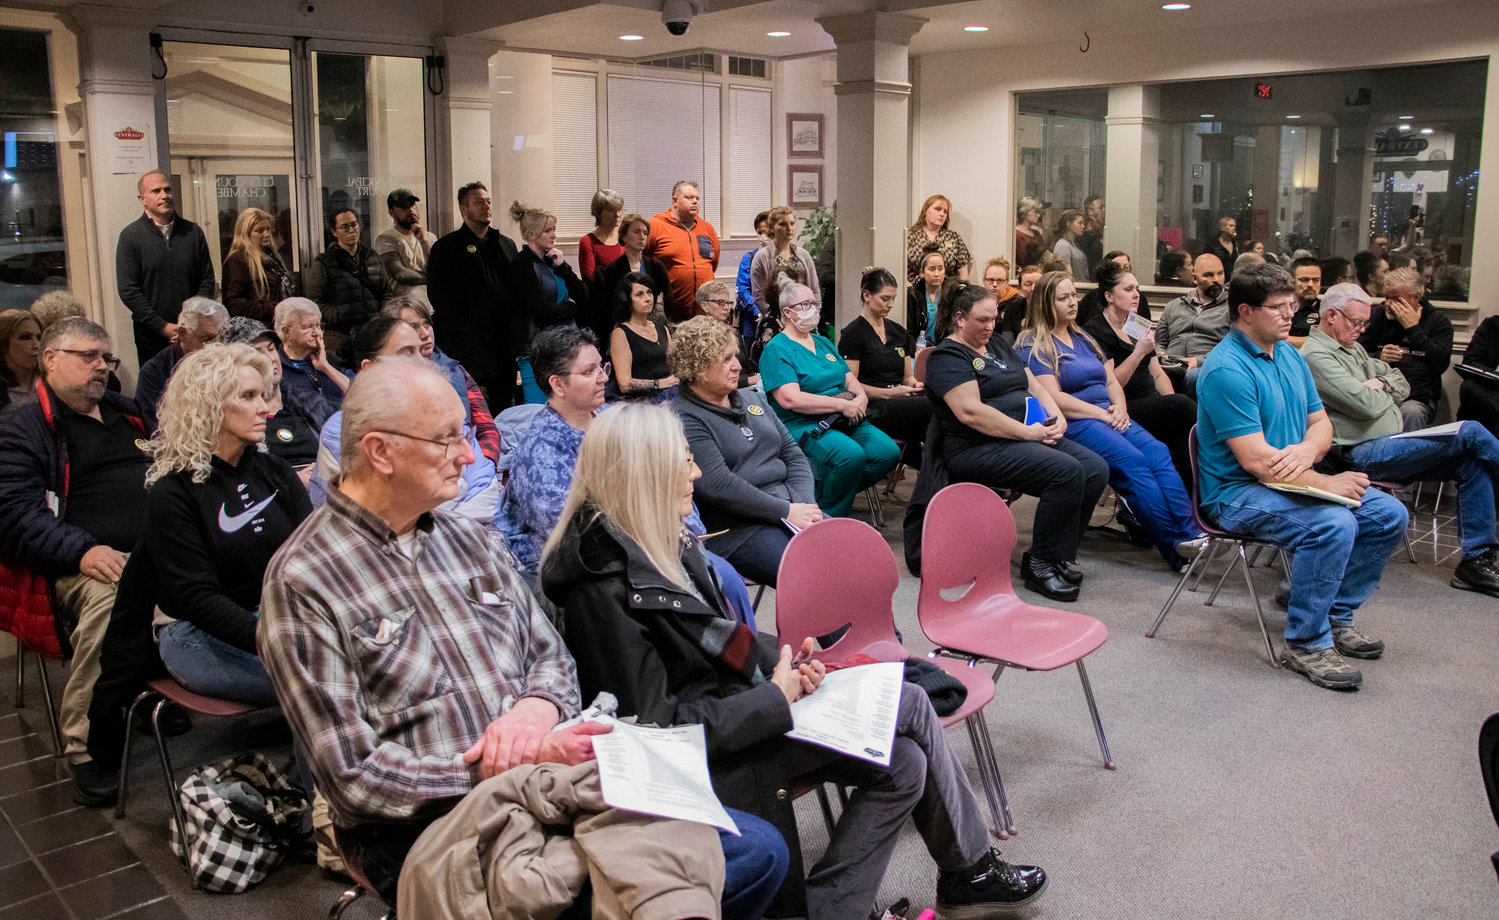 The council chambers were packed at Centralia City Hall Tuesday night for the regular meeting, mainly by nurses from Providence Centralia Hospital who were there to speak out about staffing and safety issues they are dealing with.